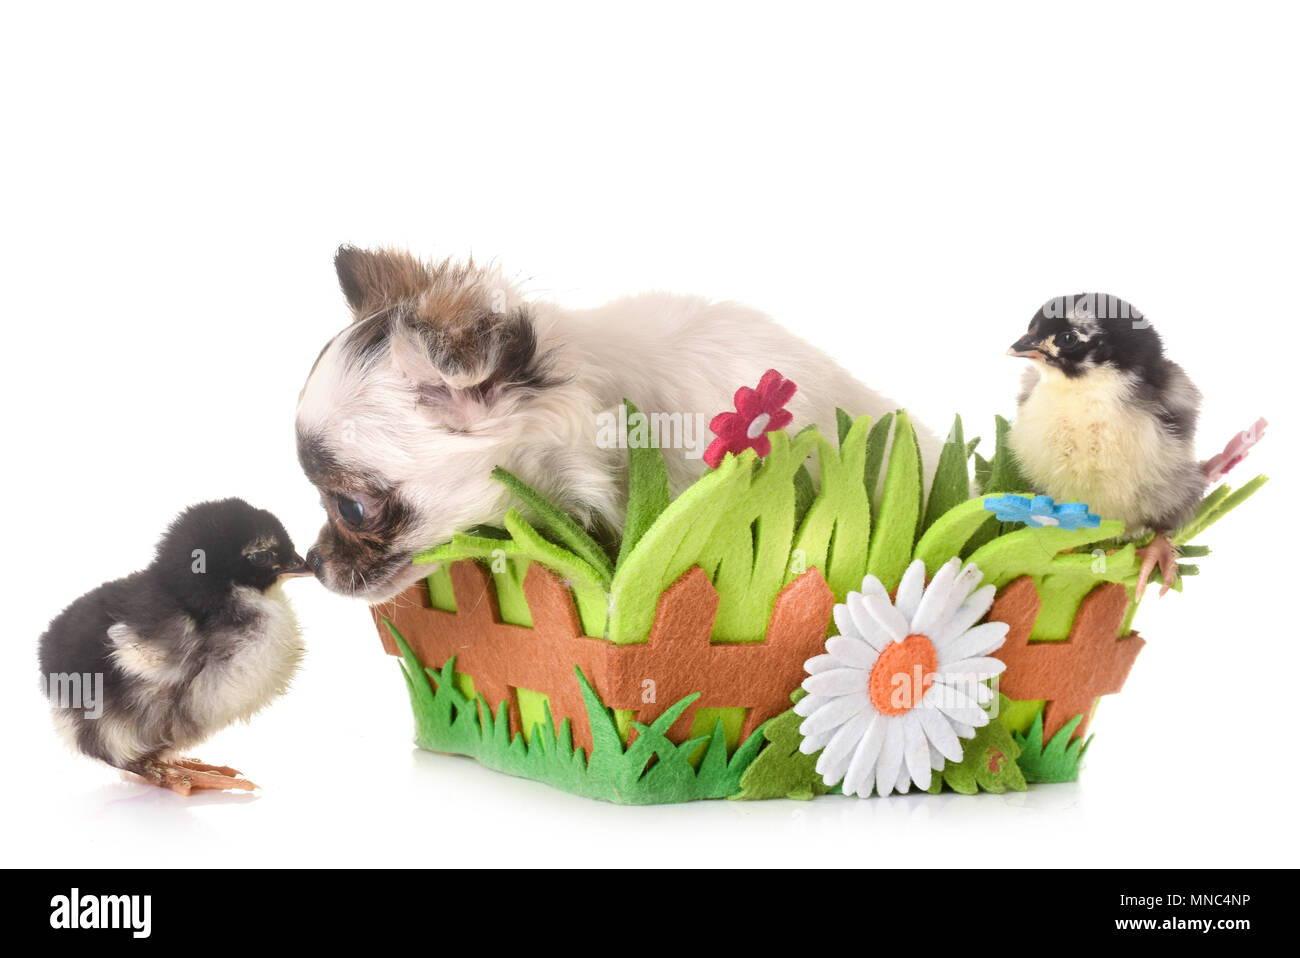 puppy chihuahua and chicks in front of white background Stock Photo